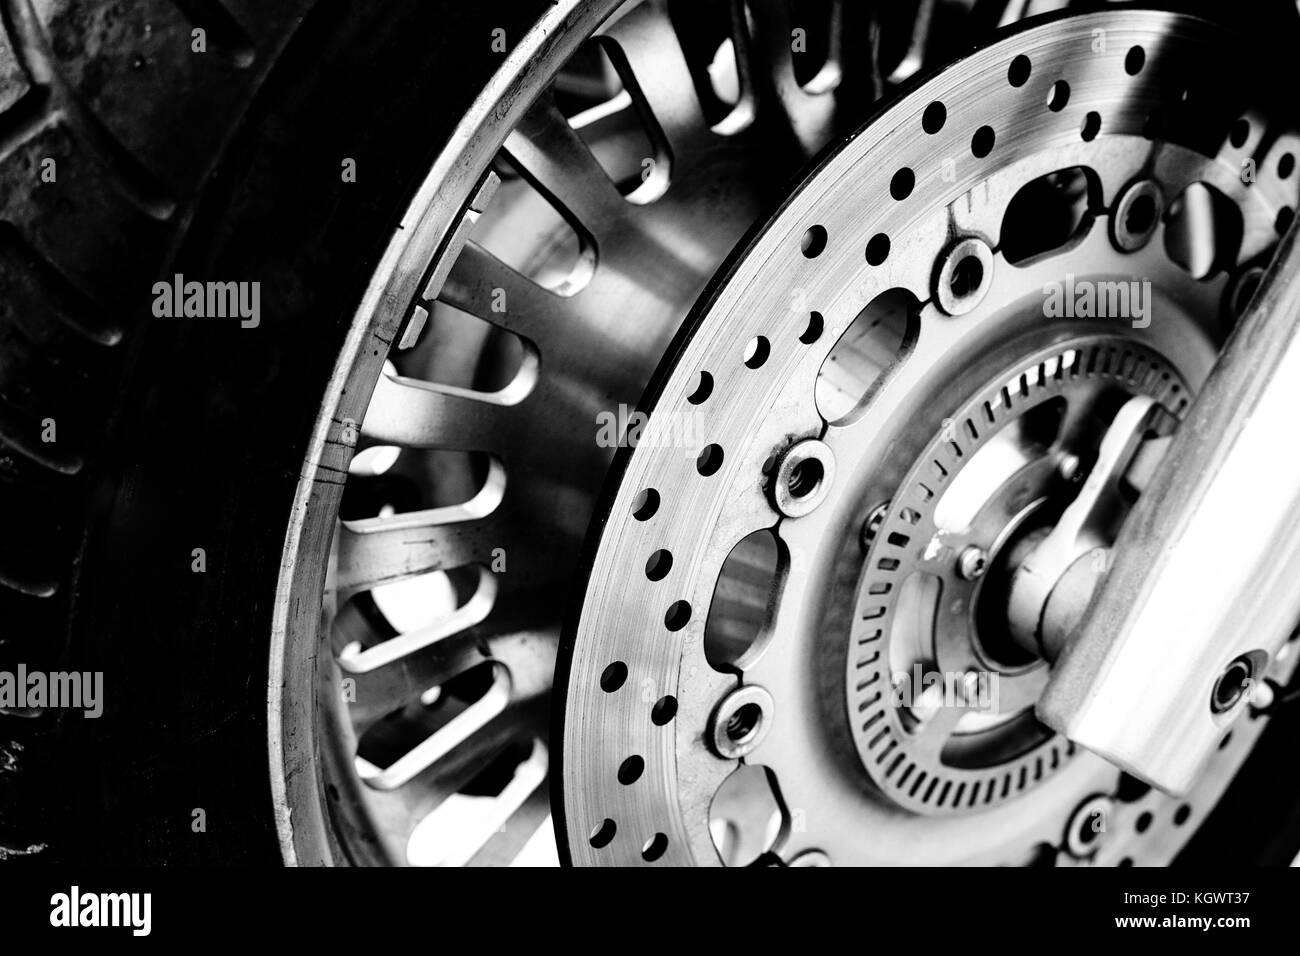 Isolated motorcycle front wheel in black and white / Close up view of motorcycle front wheel Stock Photo